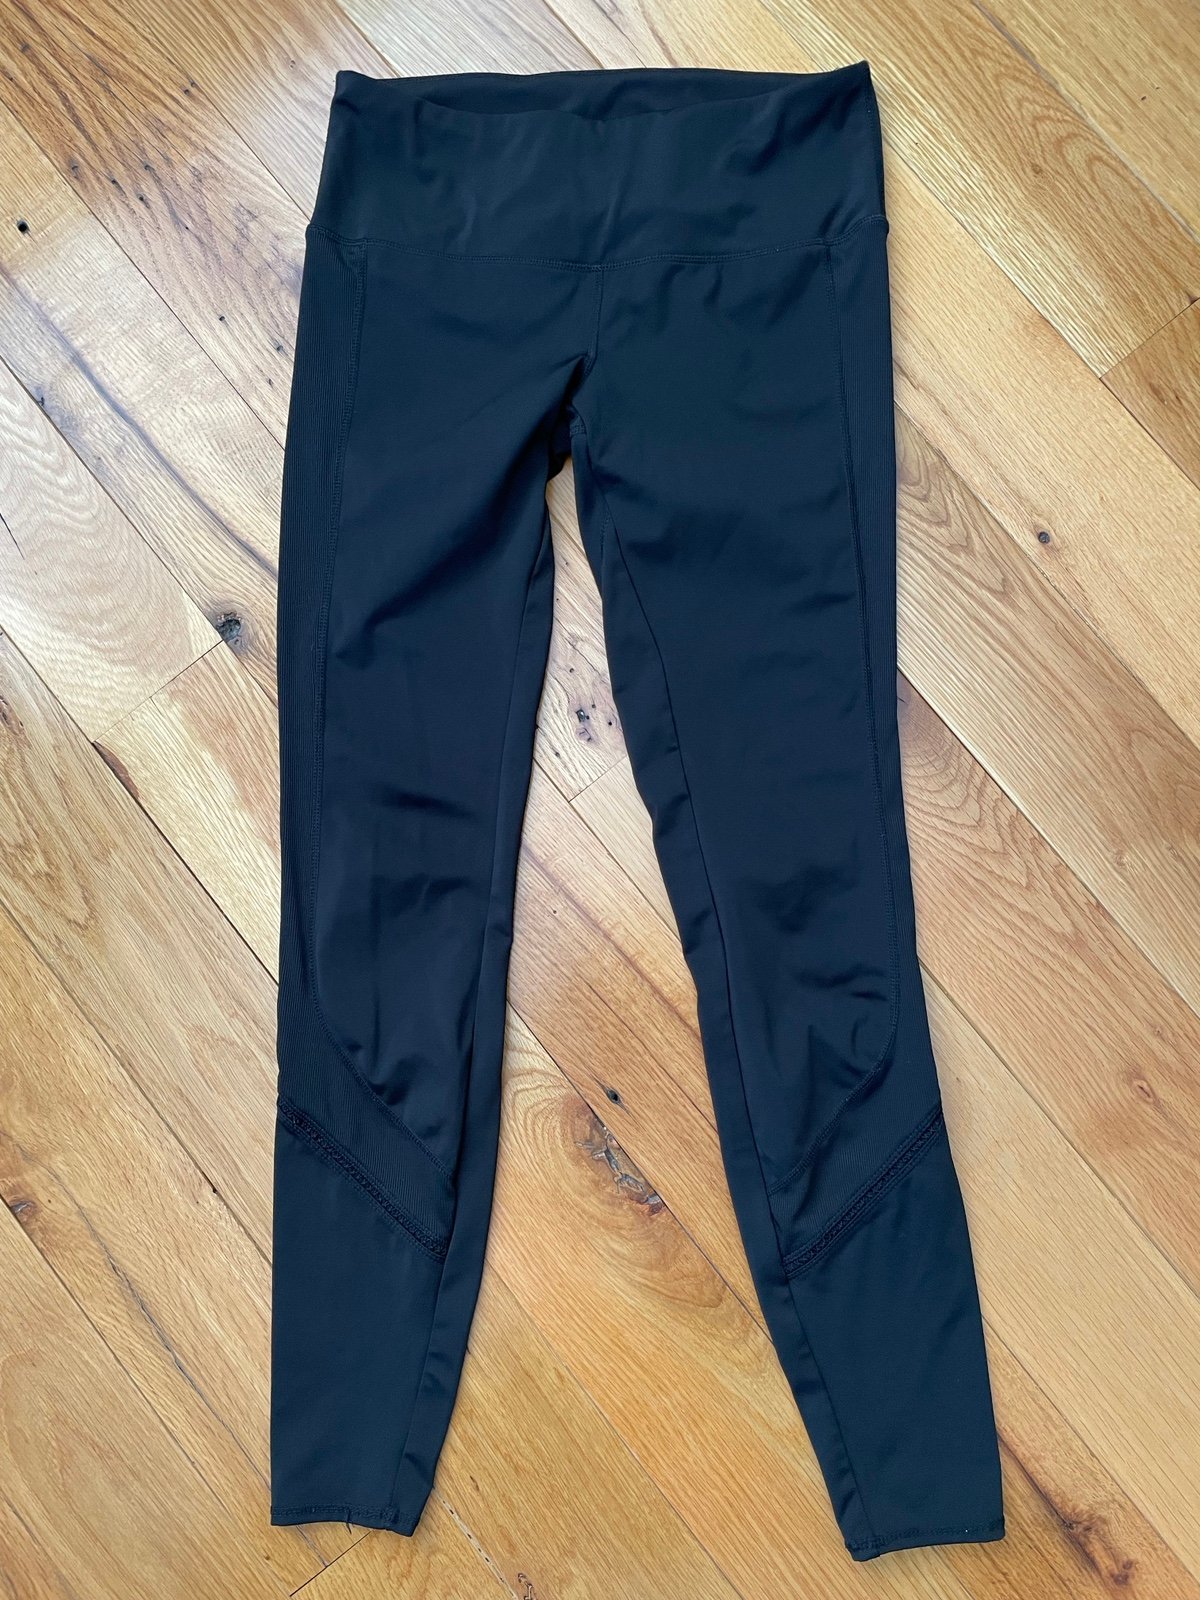 Exclusive Women’s Athletic Leggings Size Small mt9BbmQk